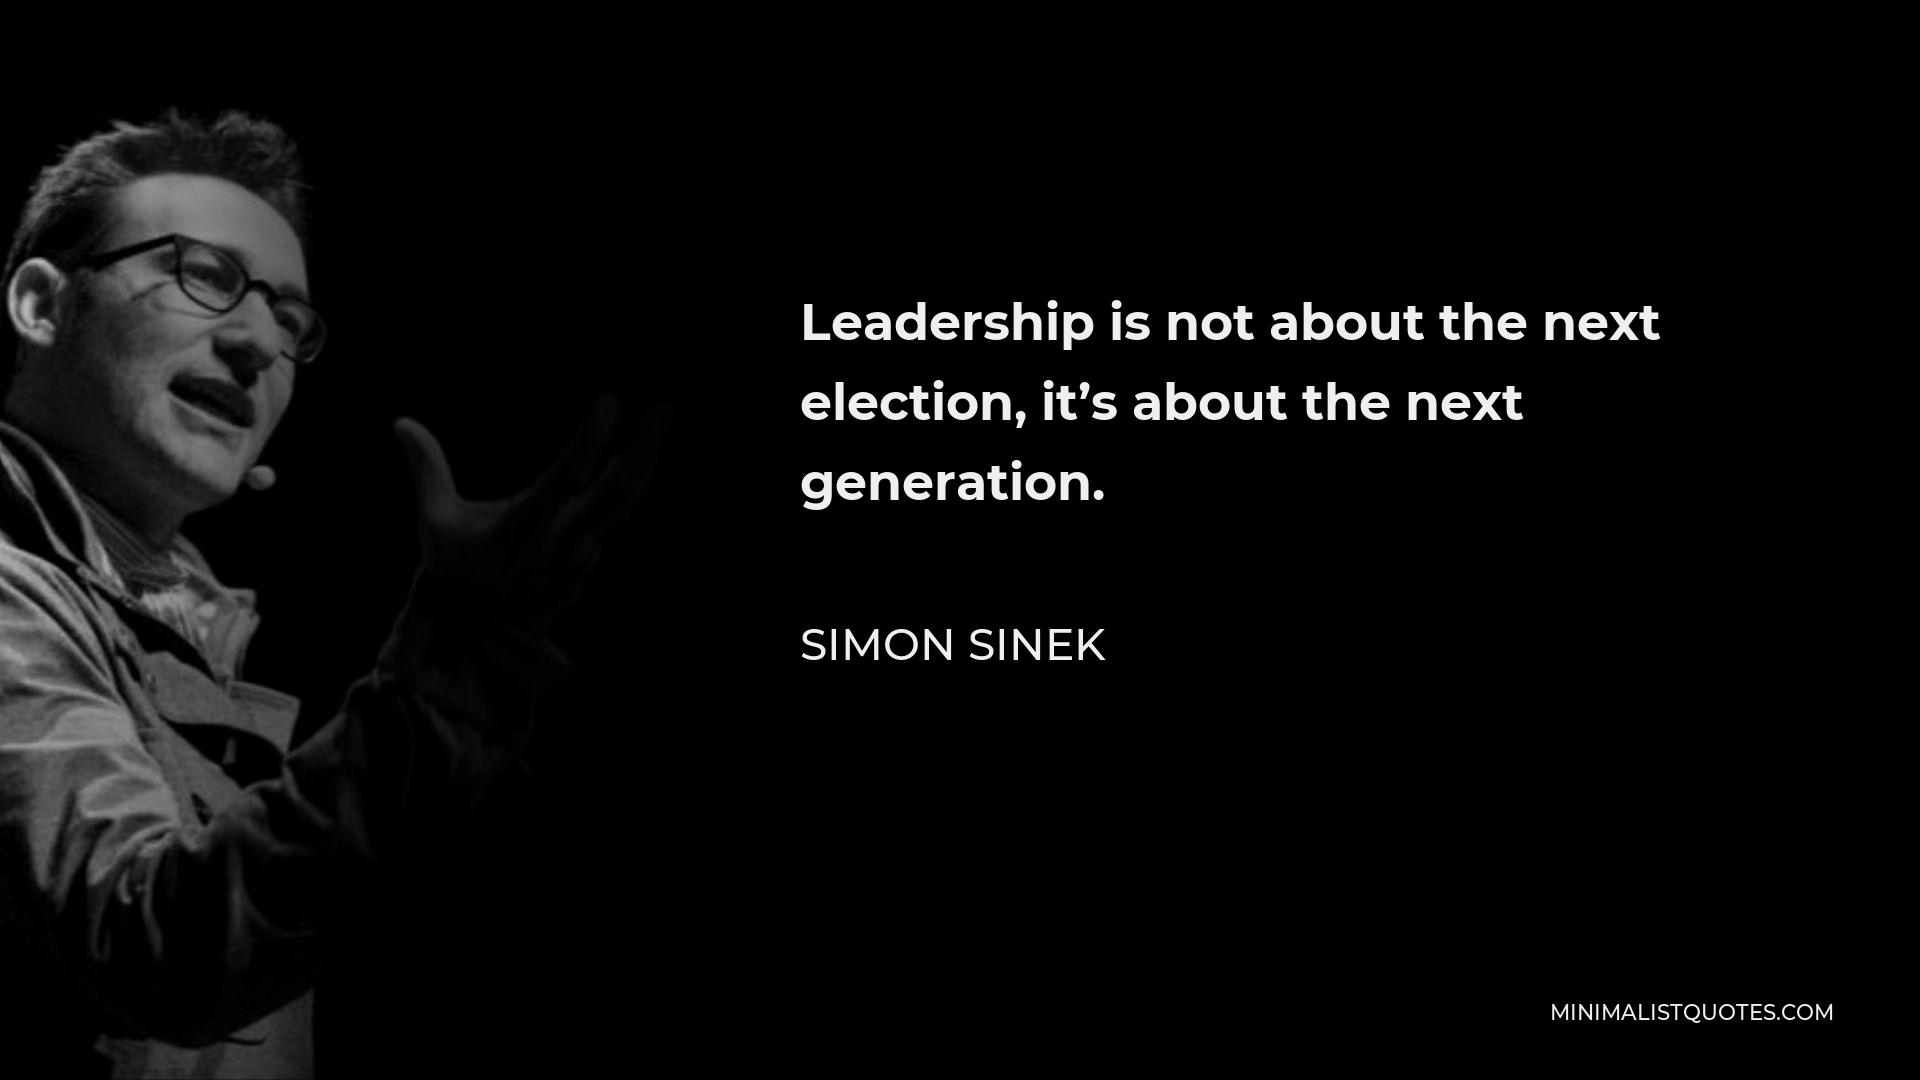 Simon Sinek Quote - Leadership is not about the next election, it’s about the next generation.